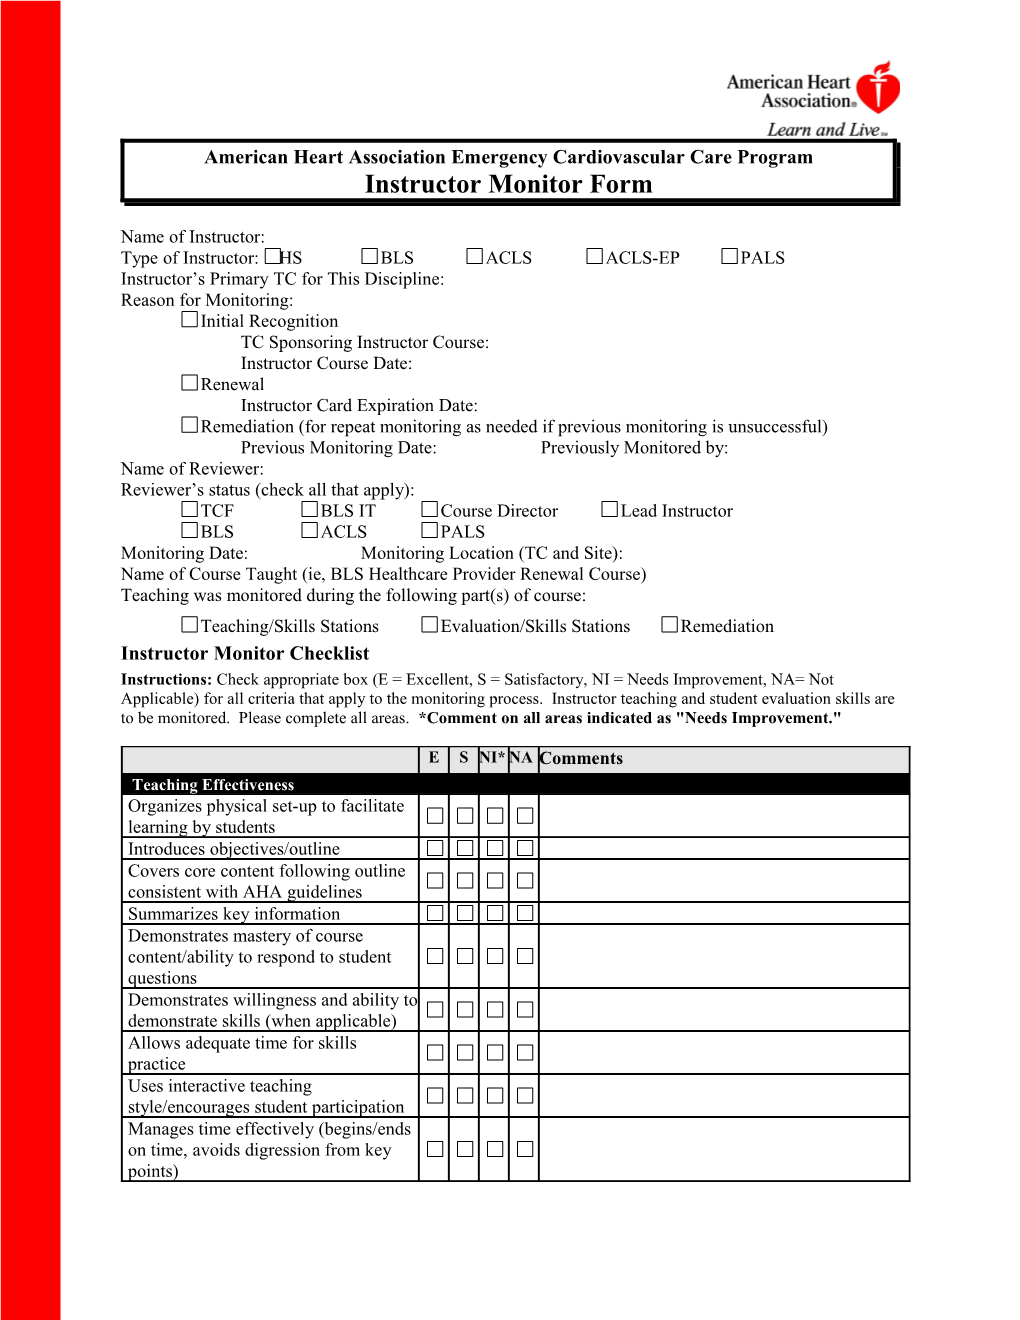 2004 PAM Instructor Monitor Form